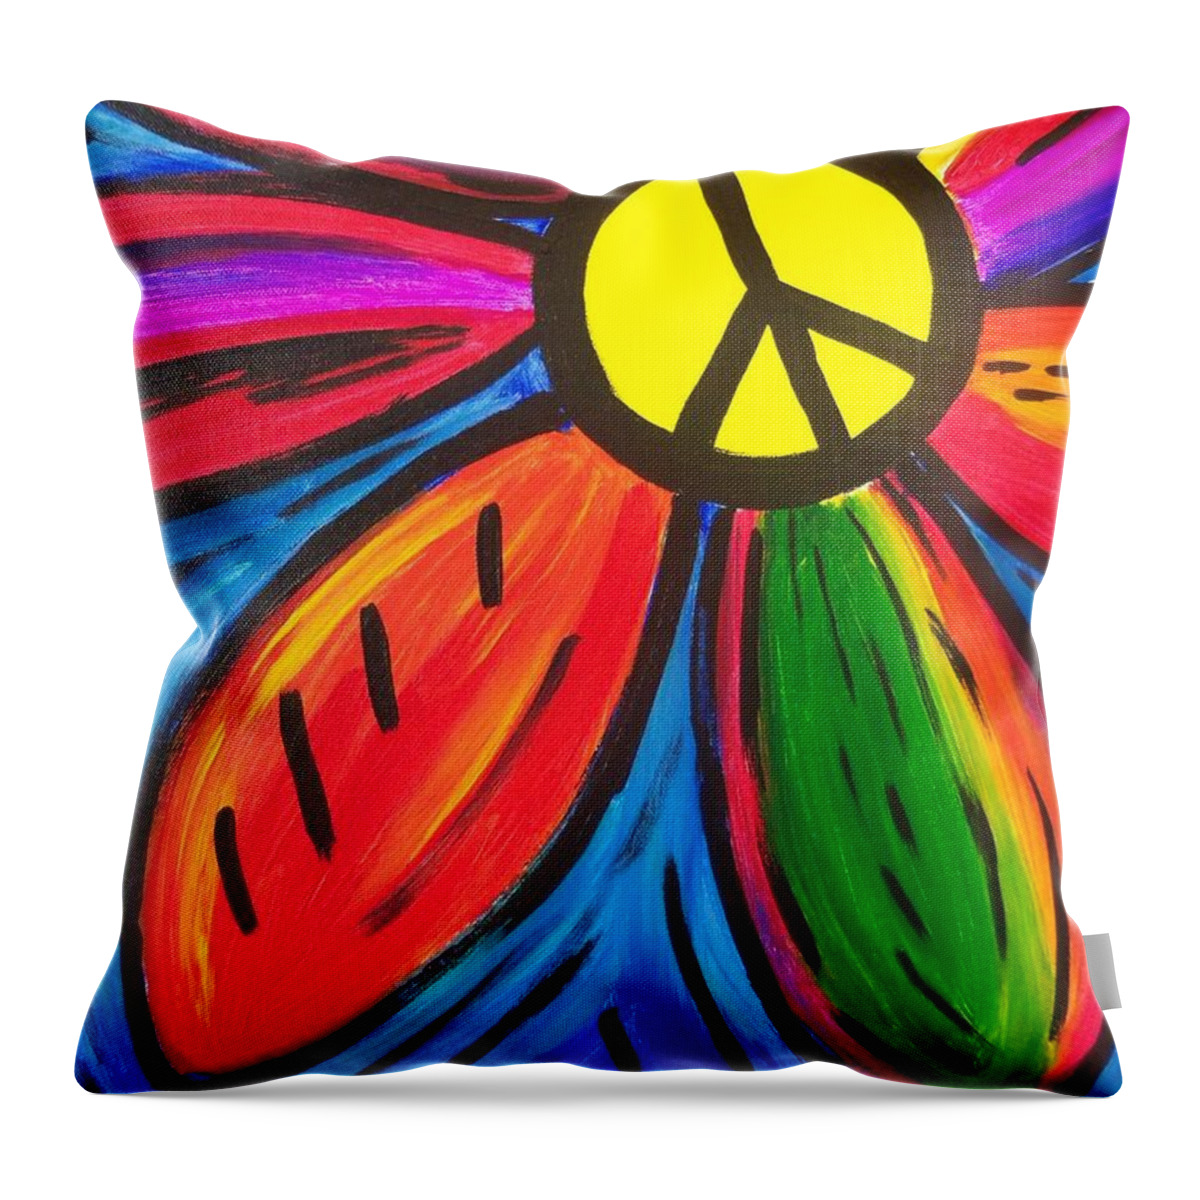 Rock Poster Throw Pillow featuring the photograph Flower Power Rock Poster by Action